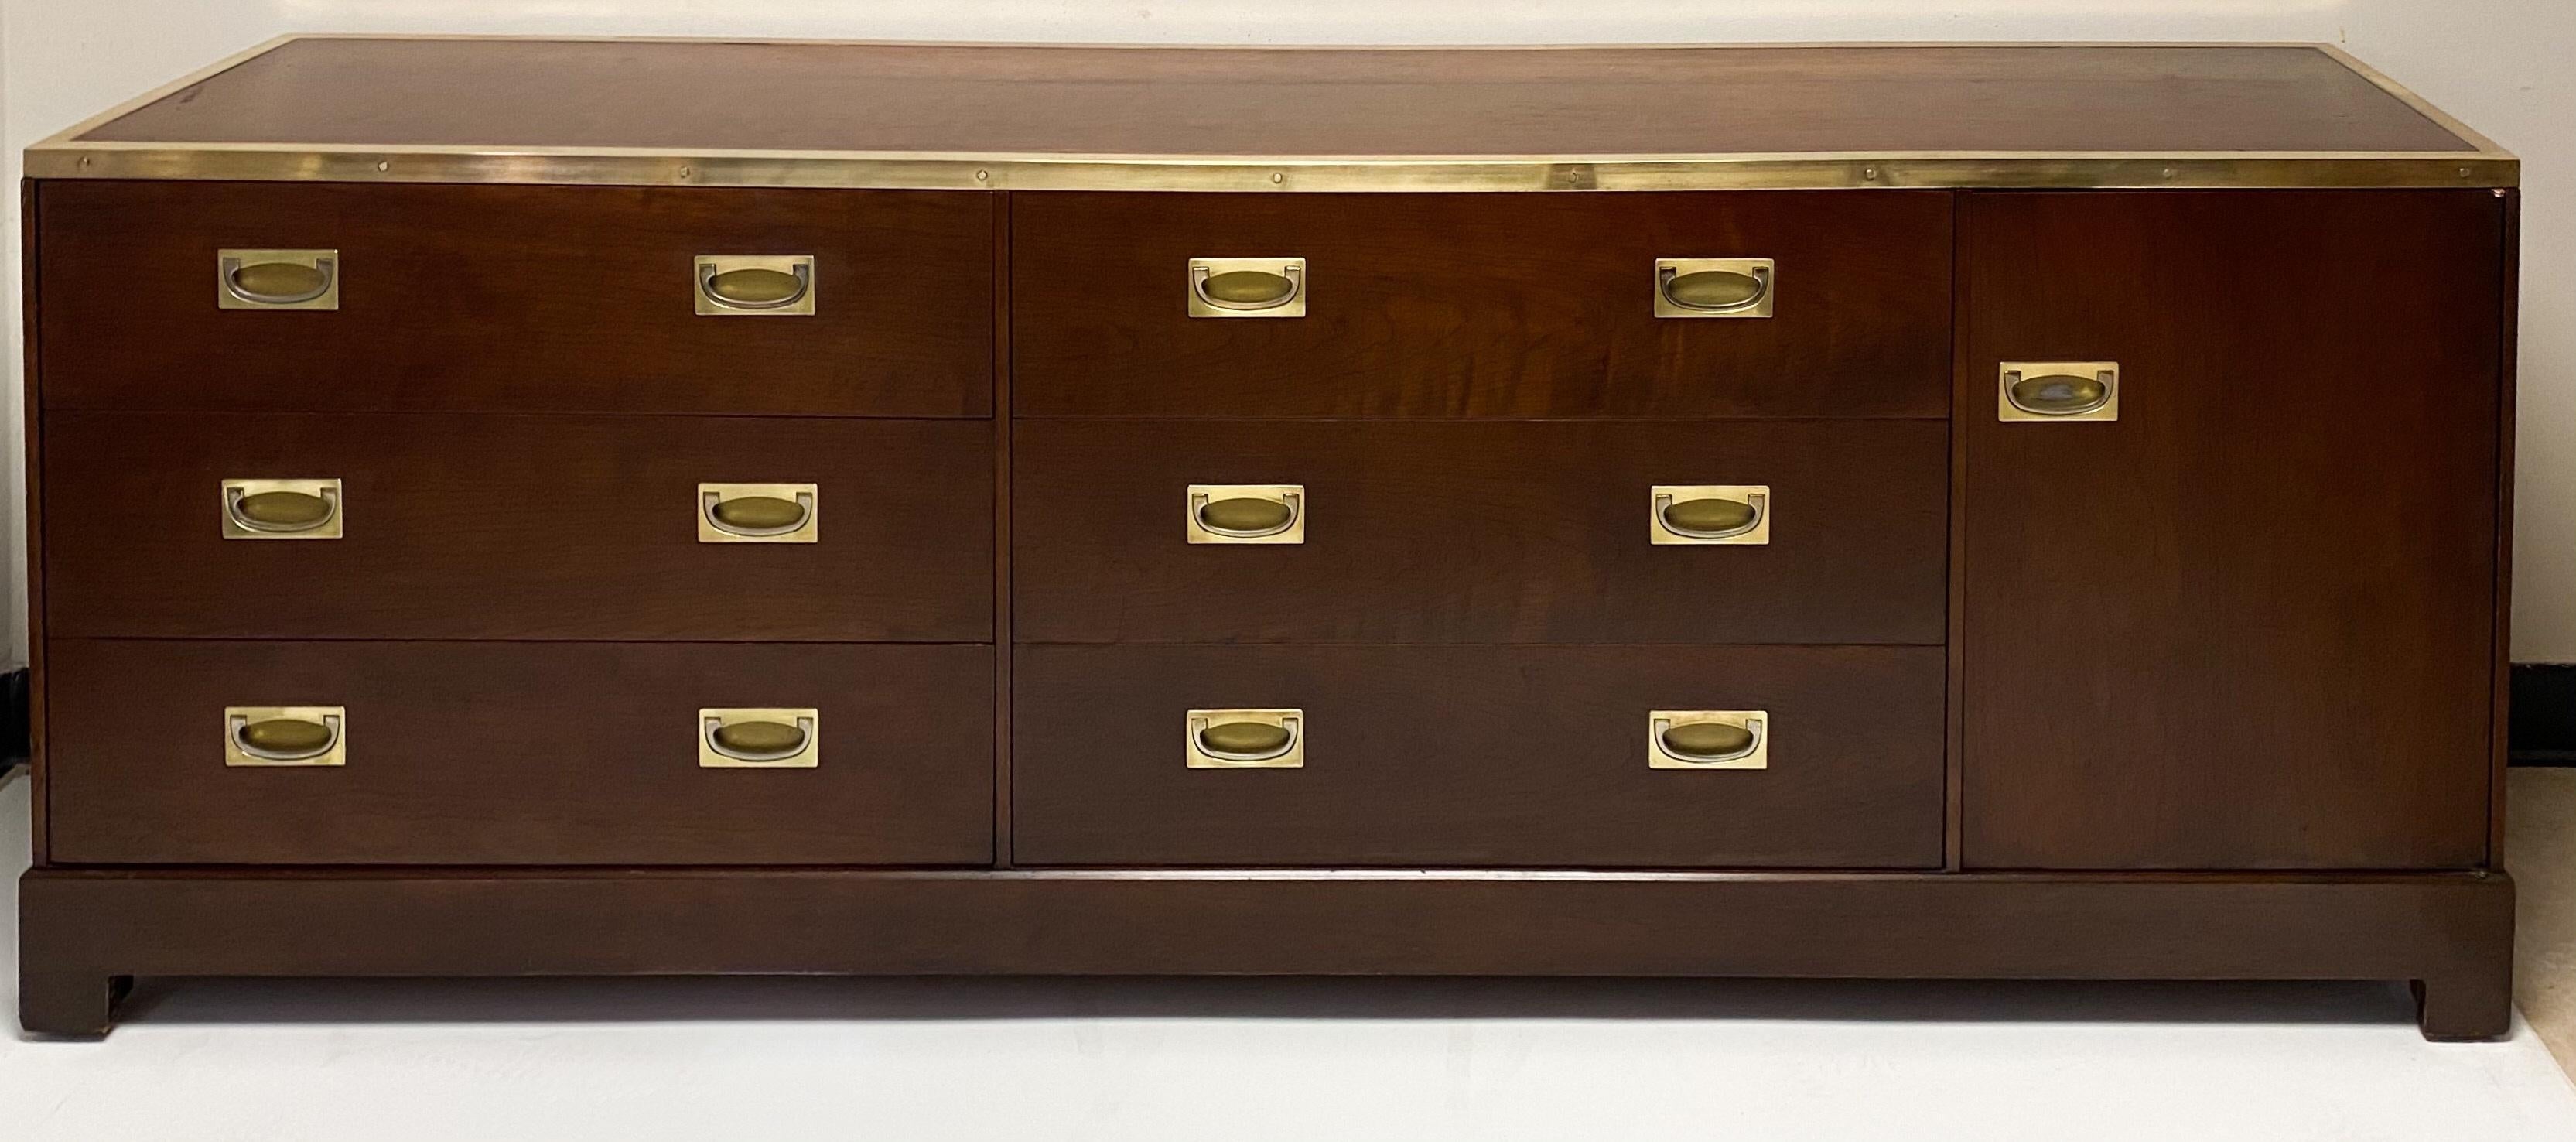 American Campaign Style Mahogany and Brass Credenza Att. To Kipp Stewart for Directional